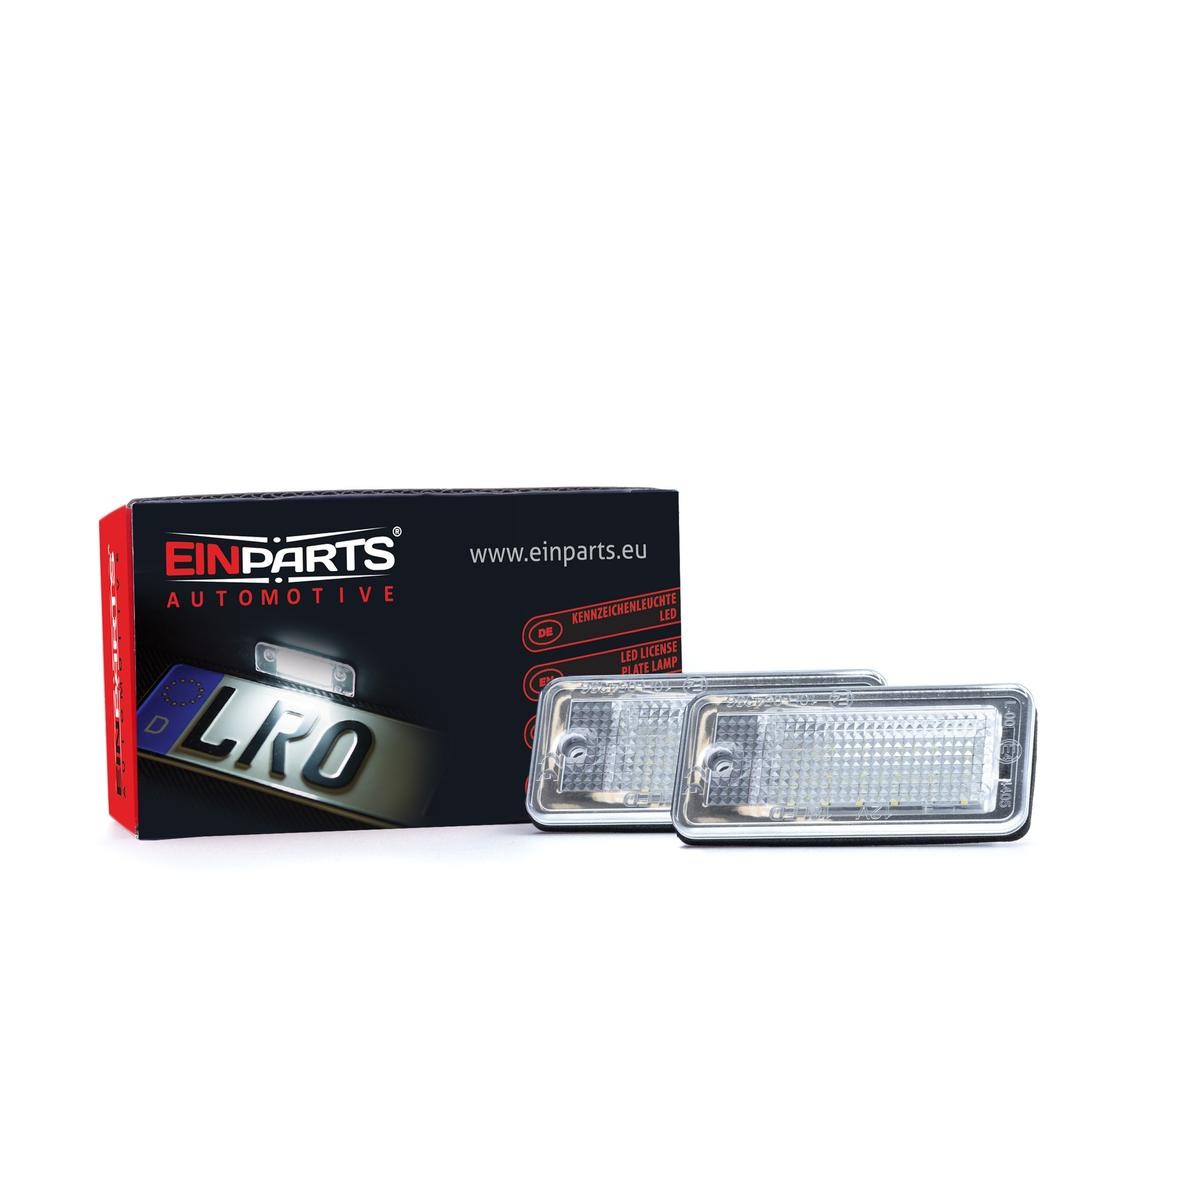 EINPARTS LED Suitable for CAN bus systems Licence Plate Light EP18 buy